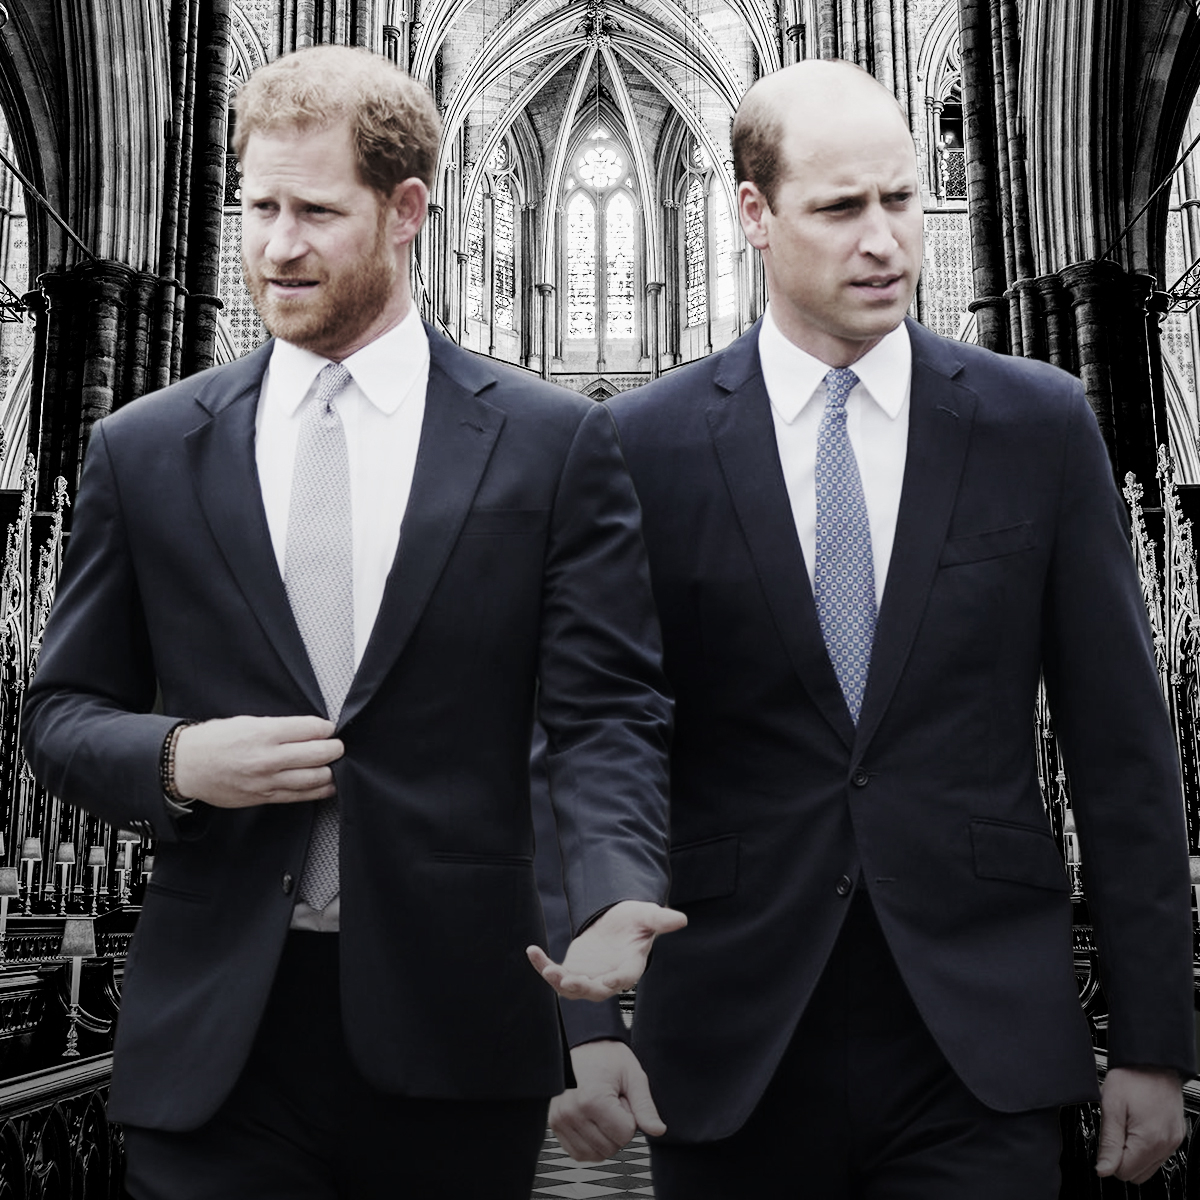 The History of Prince Harry and Prince William’s Feud